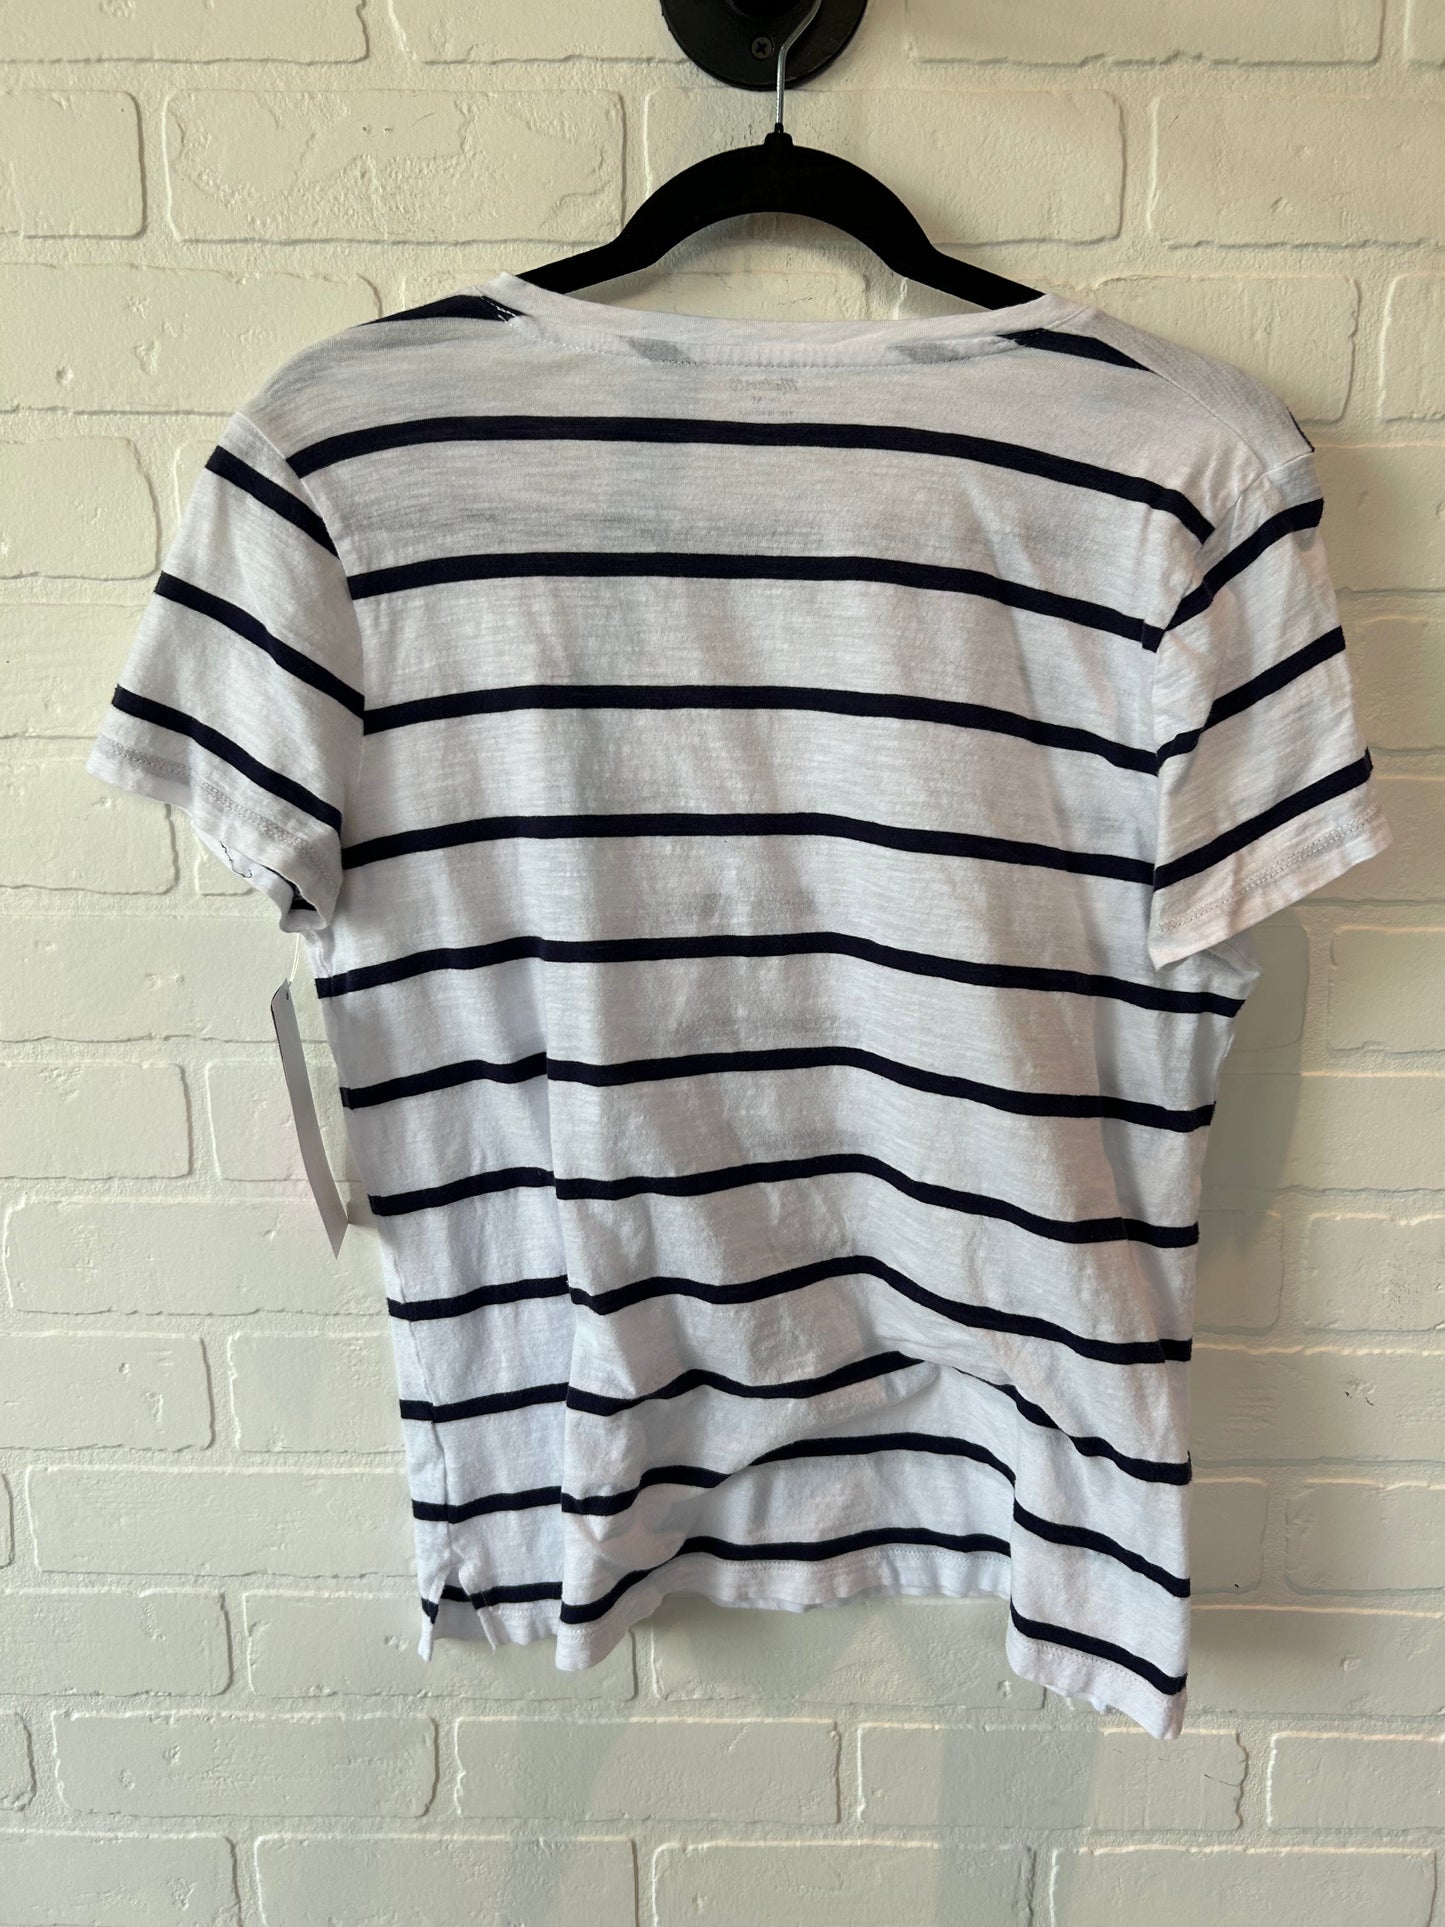 Blue & White Top Short Sleeve Madewell, Size M